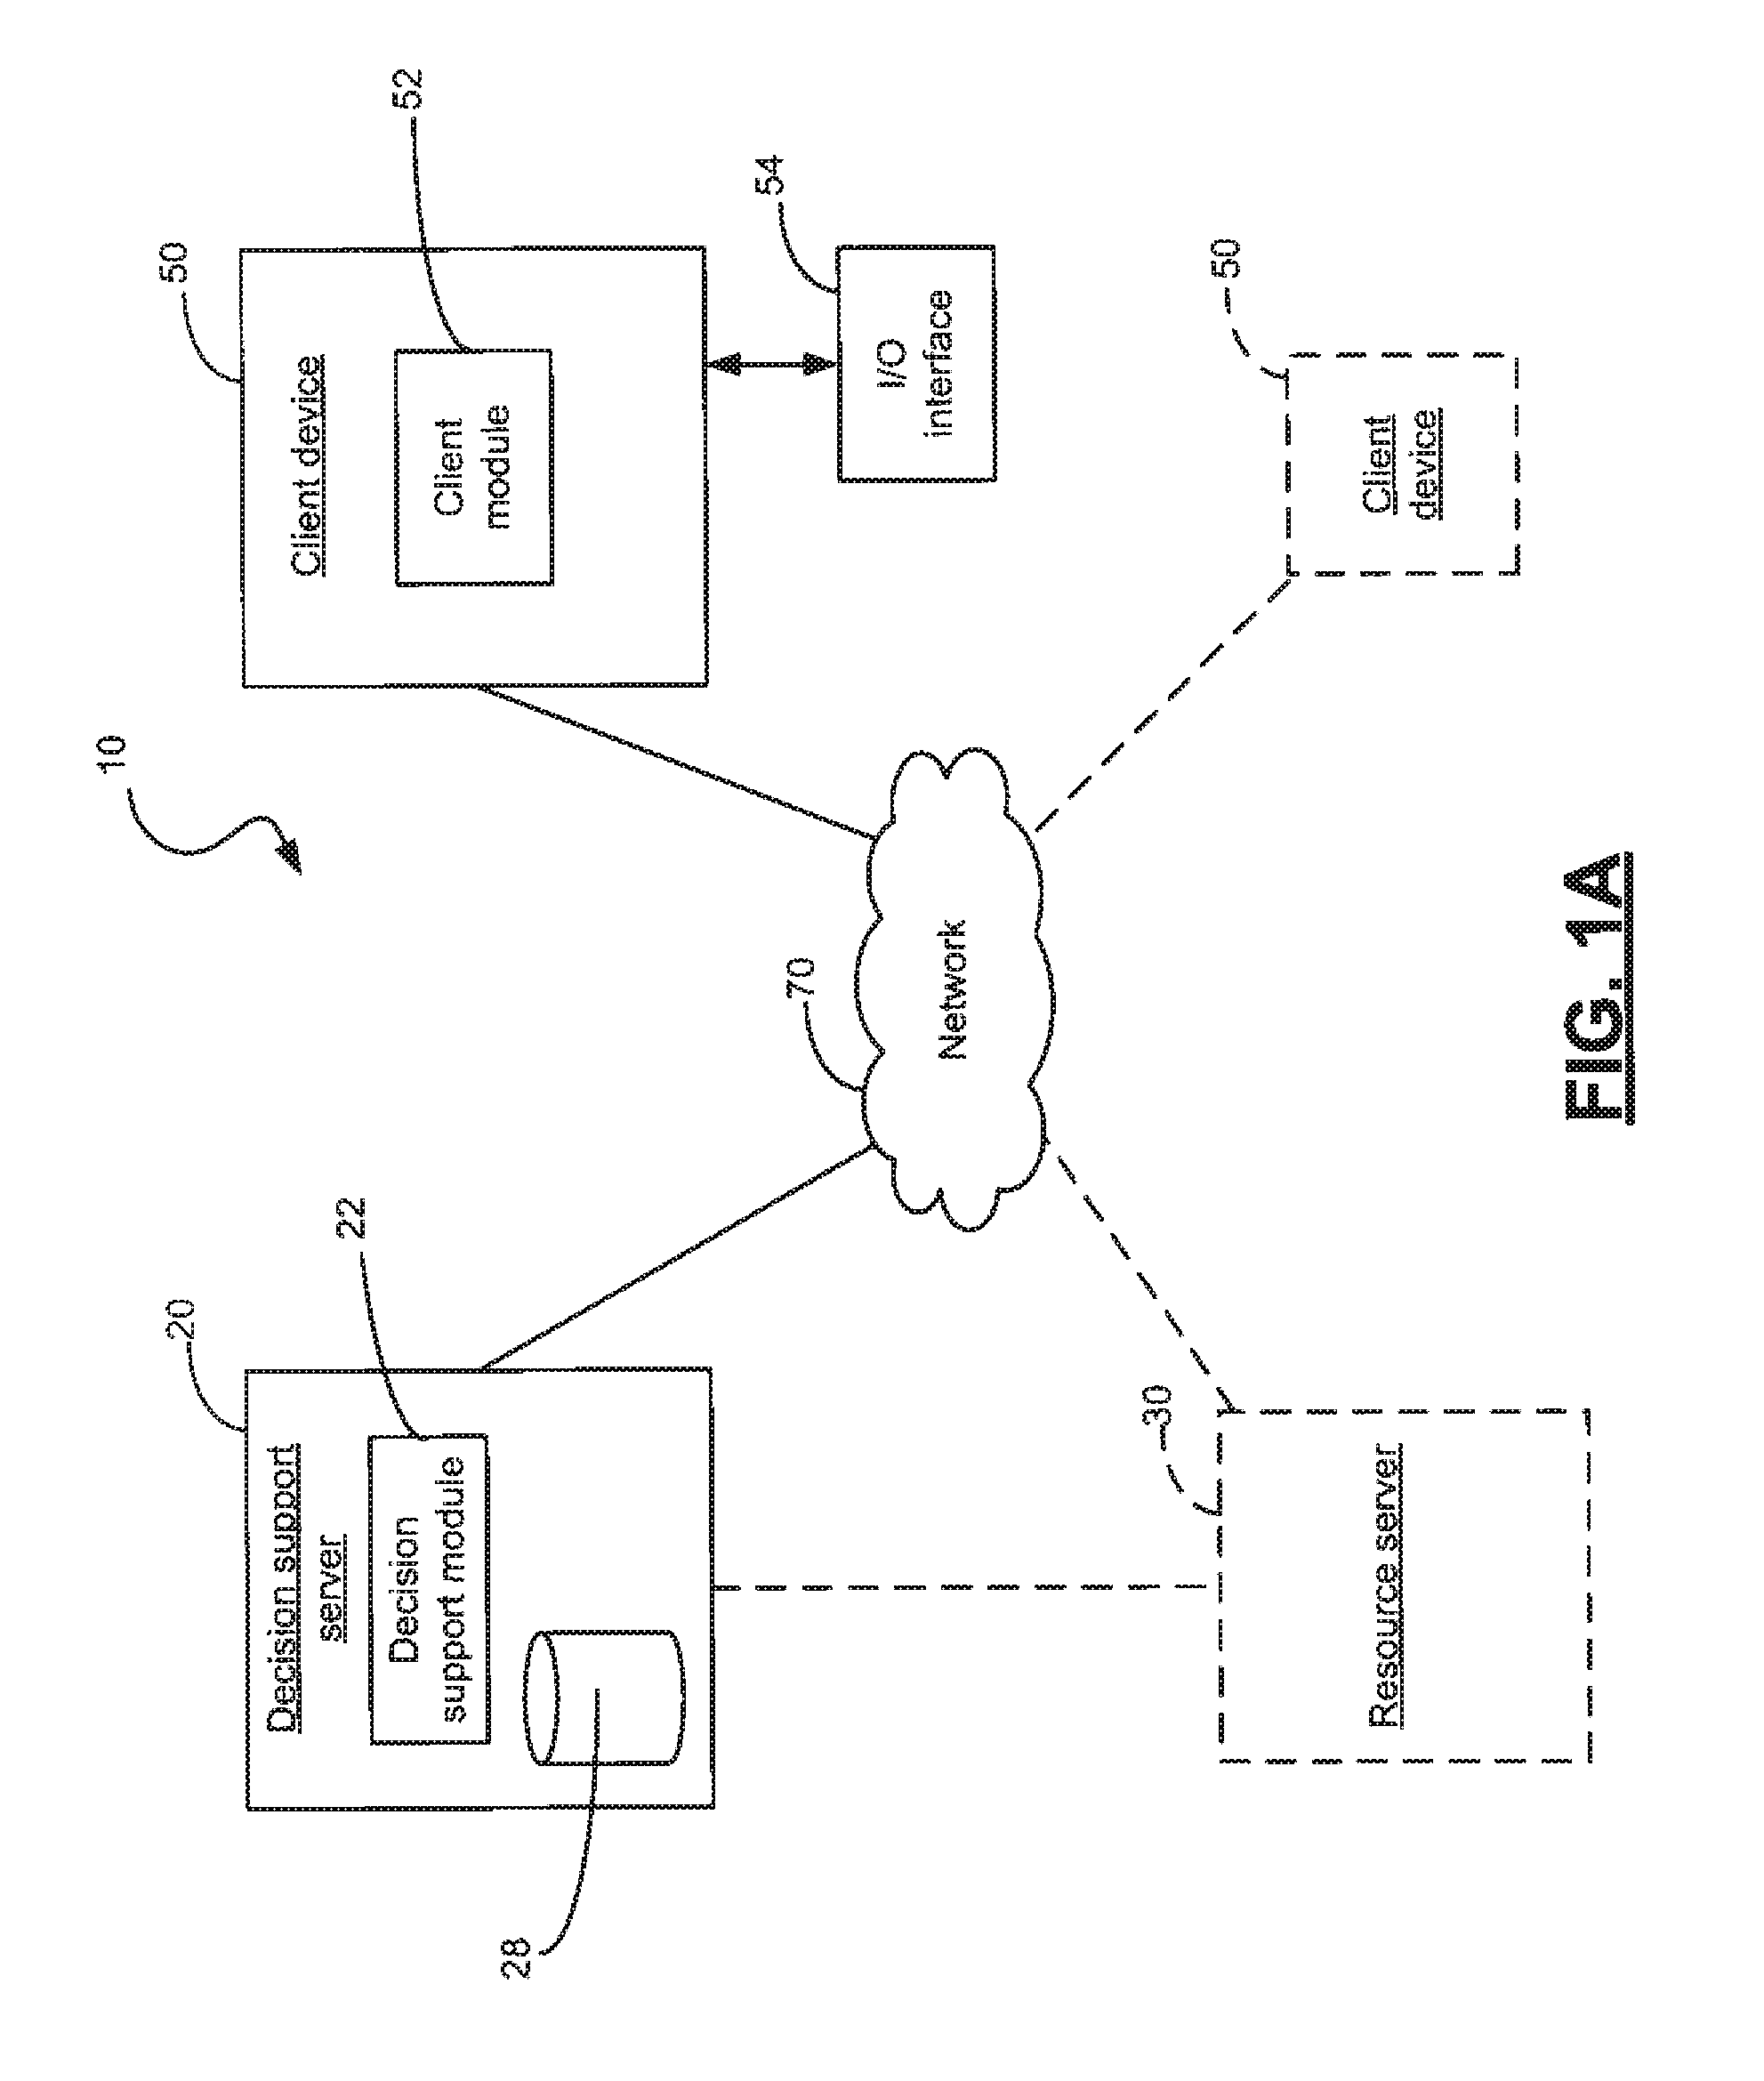 Educational decision support system and associated methods